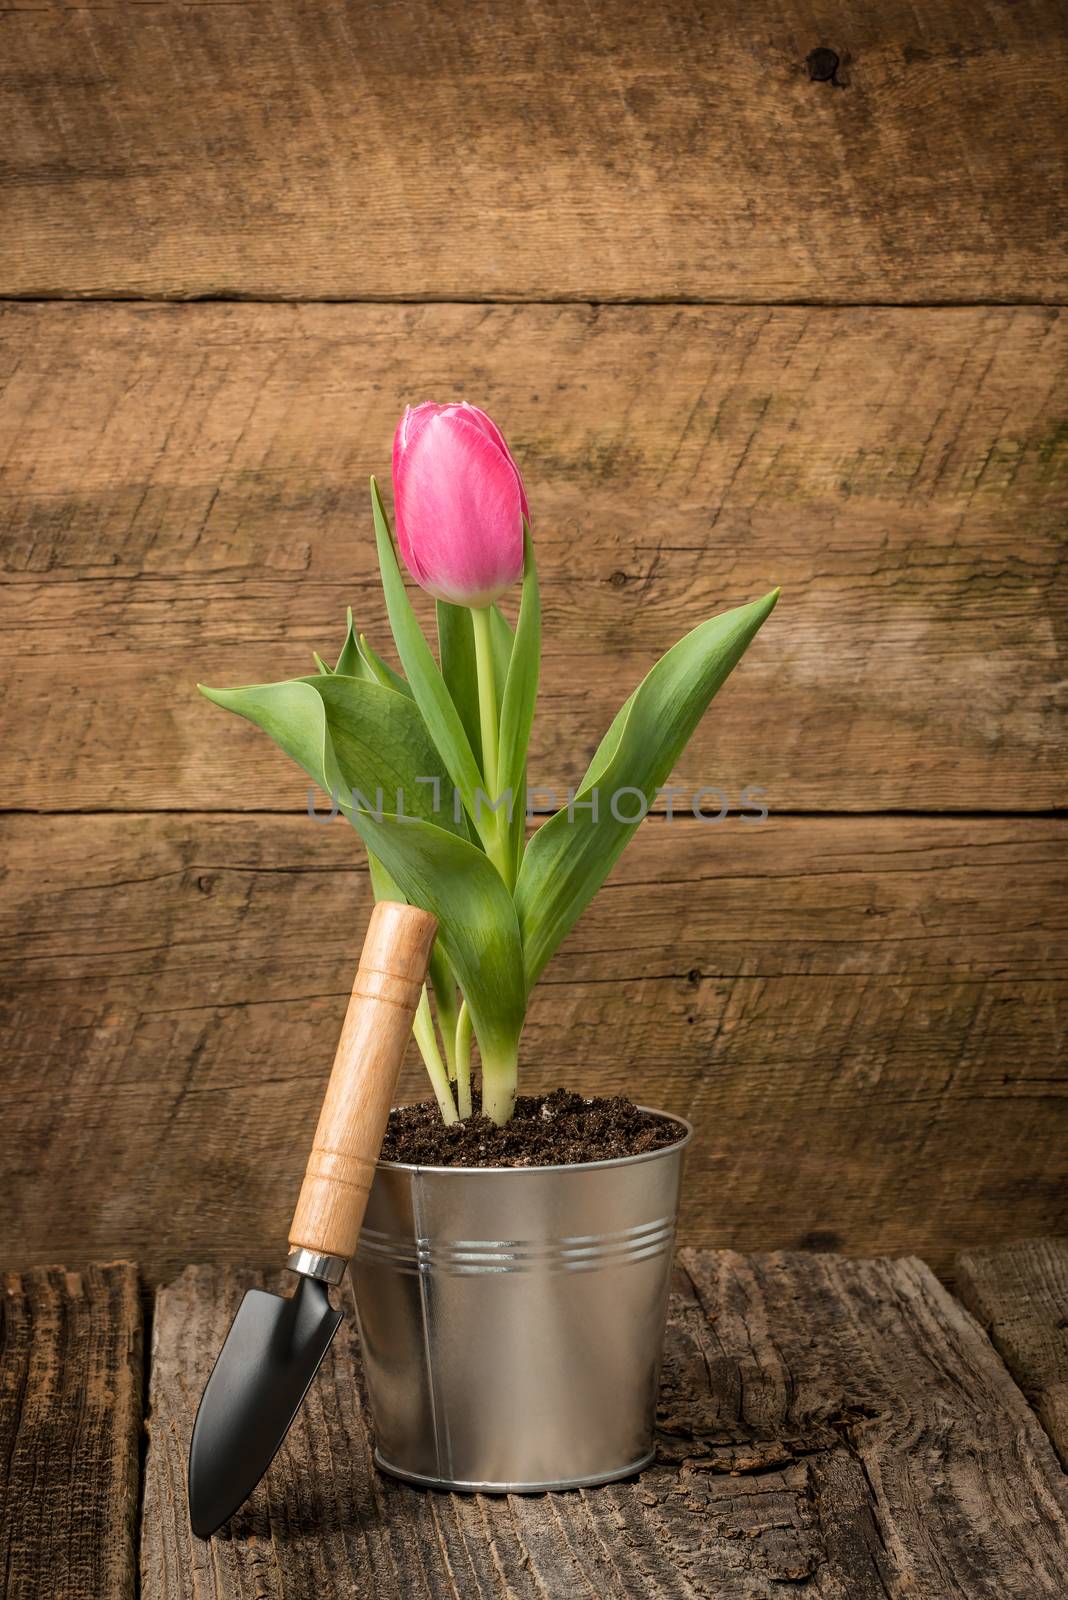 Pink tulip in a tin container on a worn barnboard background.